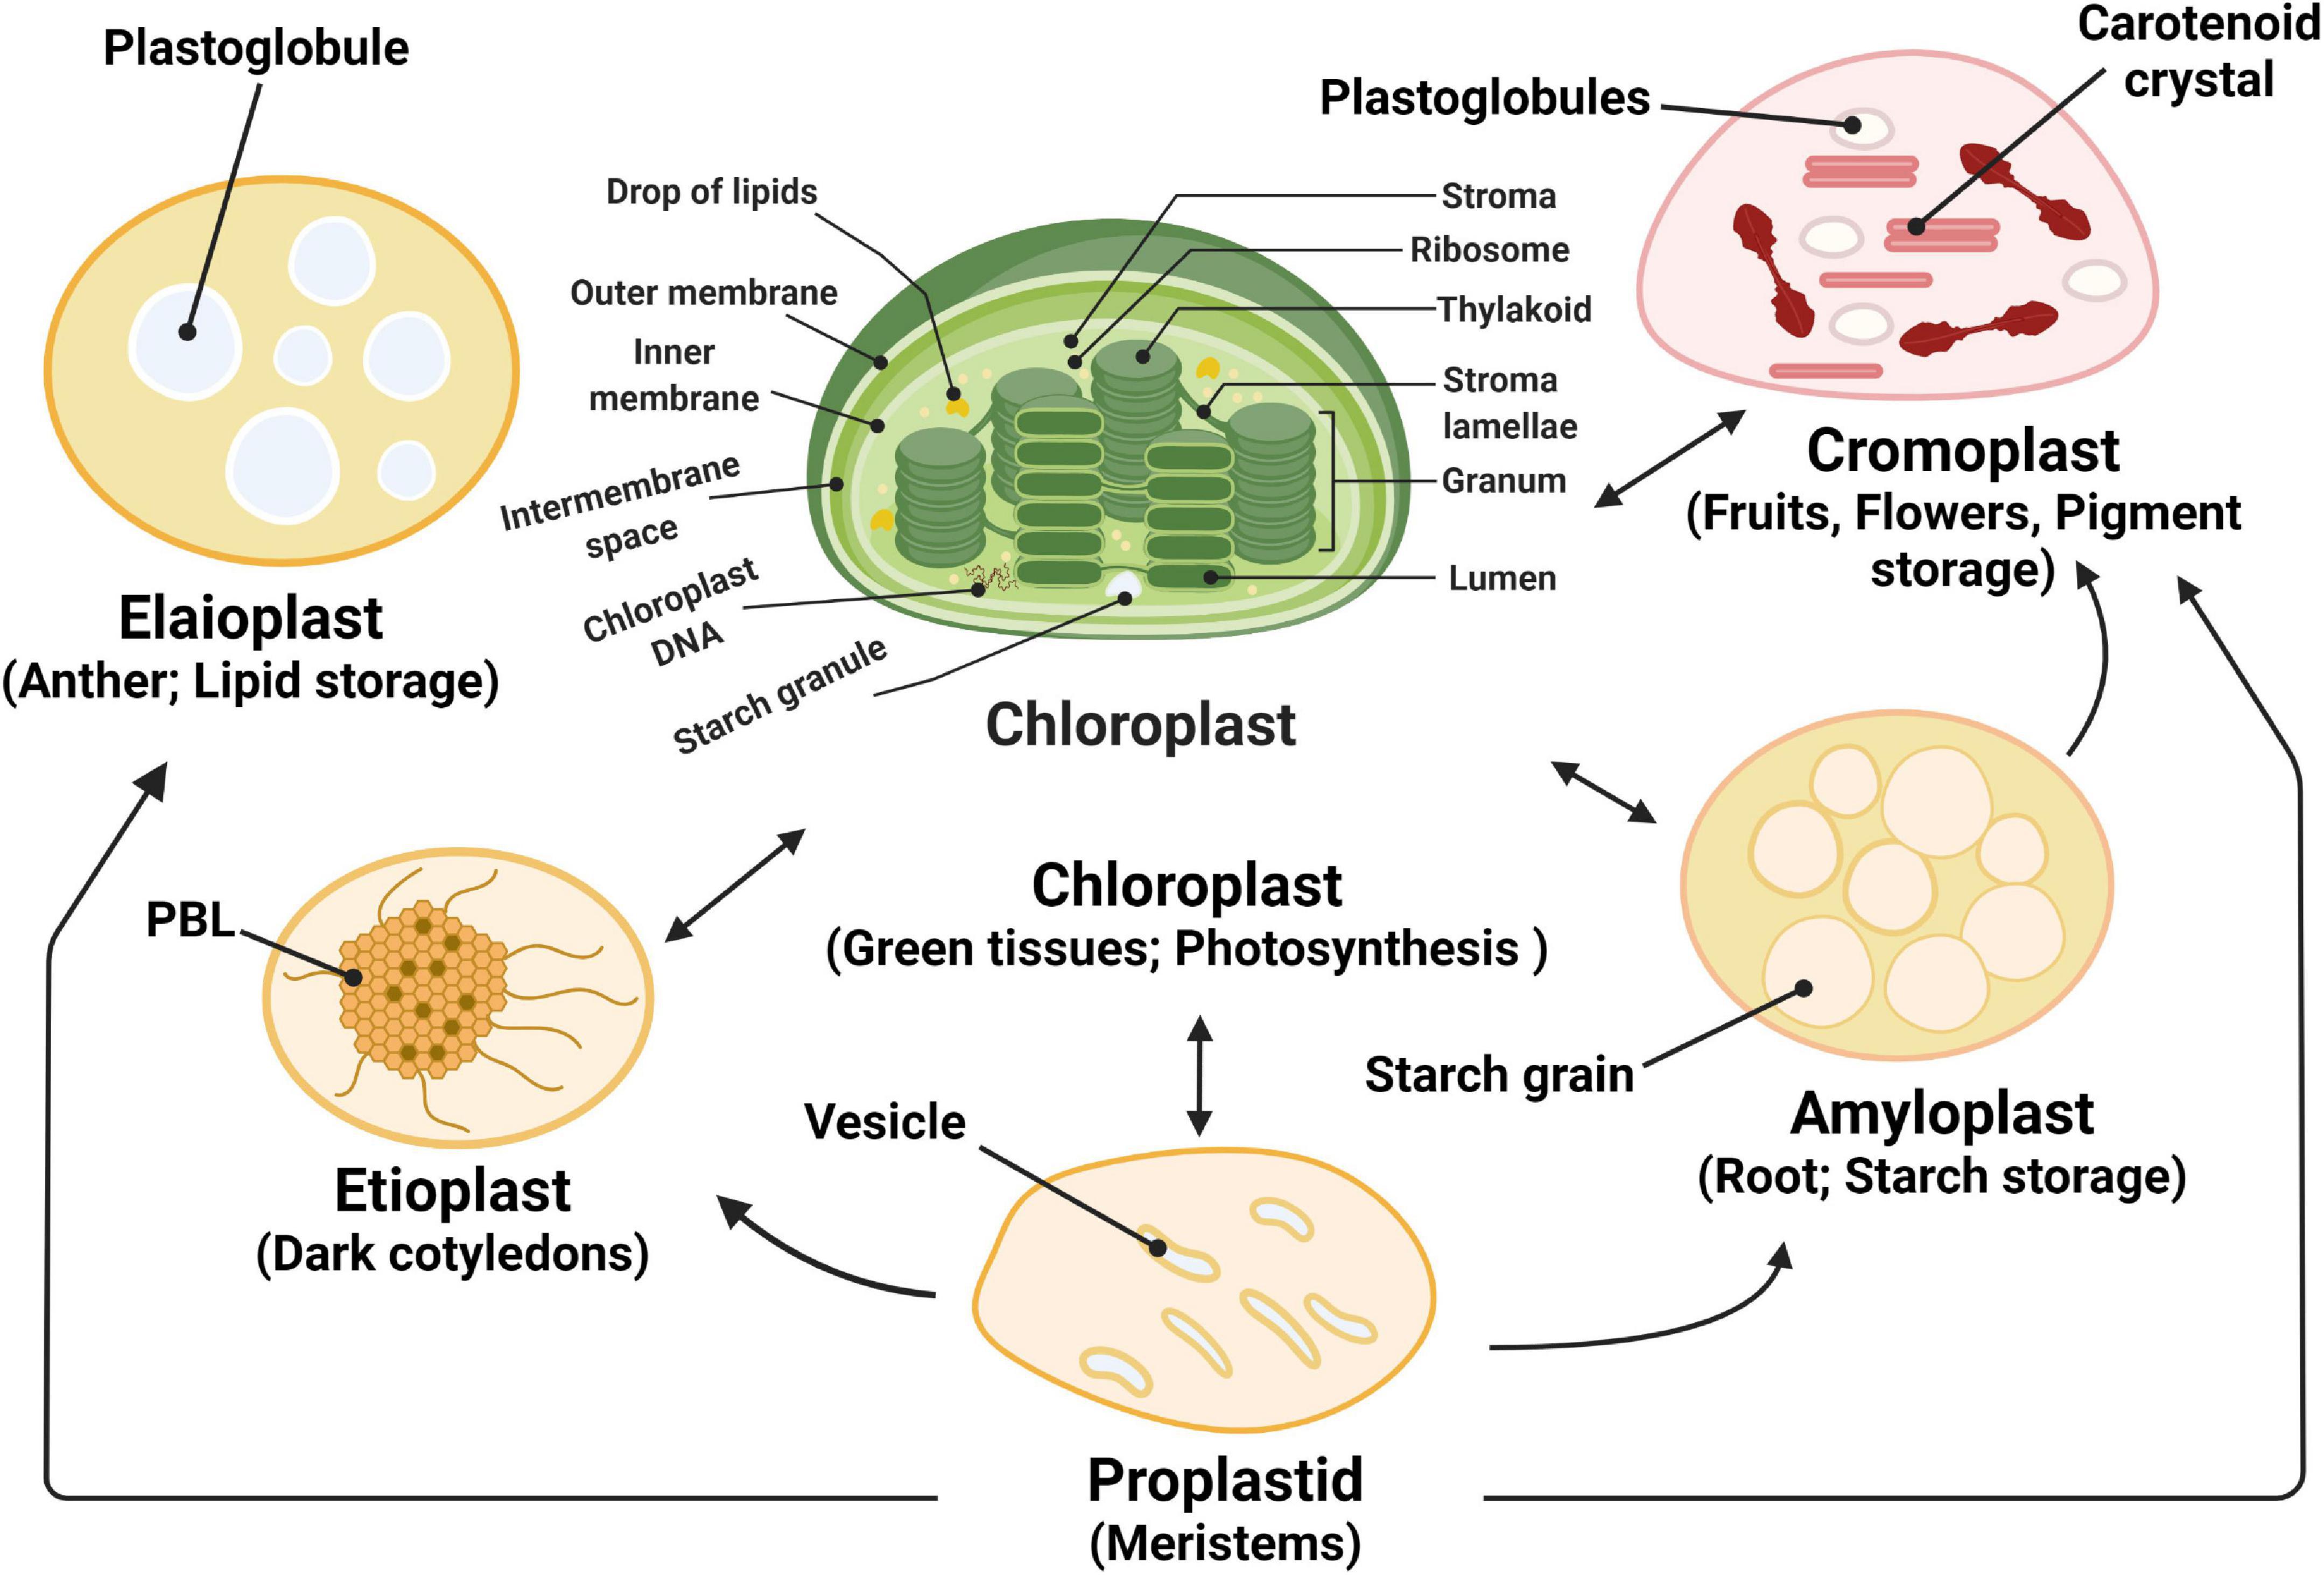 Diagrams to show arrangement of chloroplasts within cell, shown in